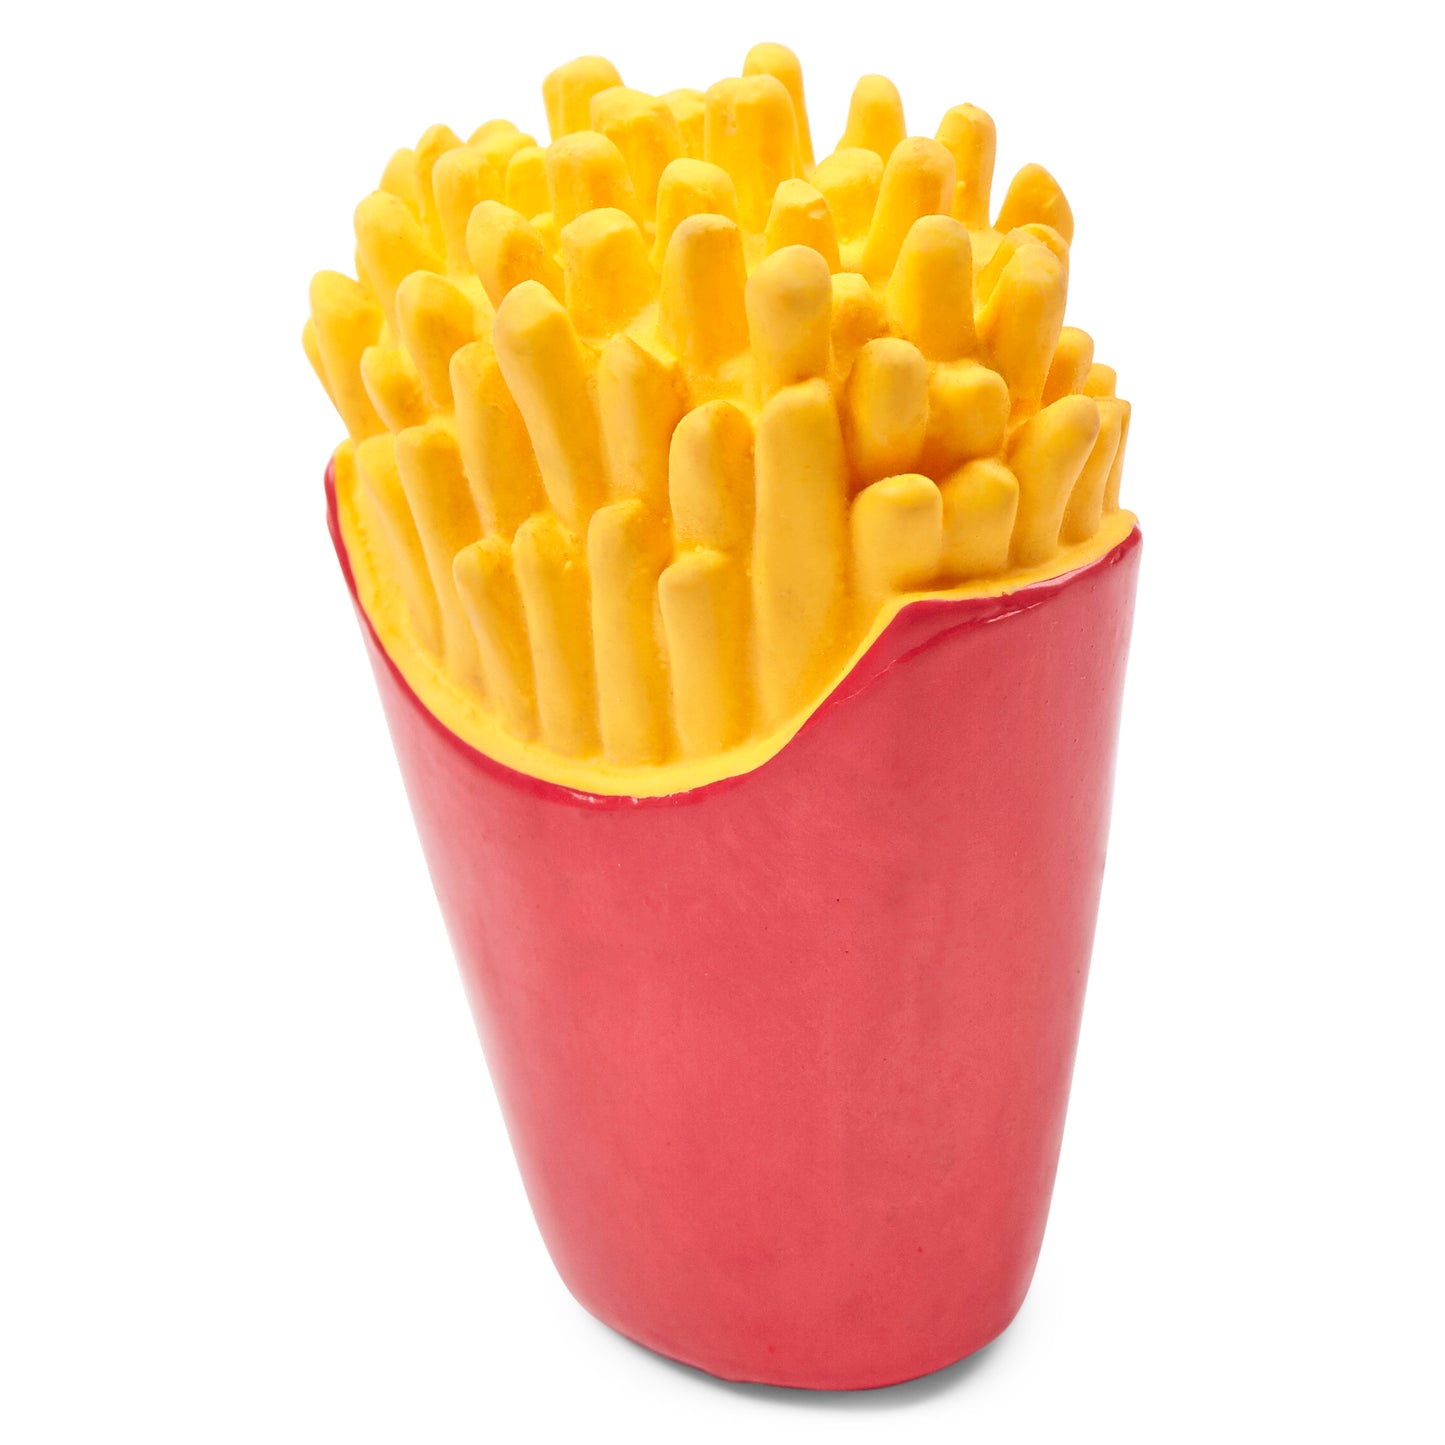 Fries latex squeaky toy chips